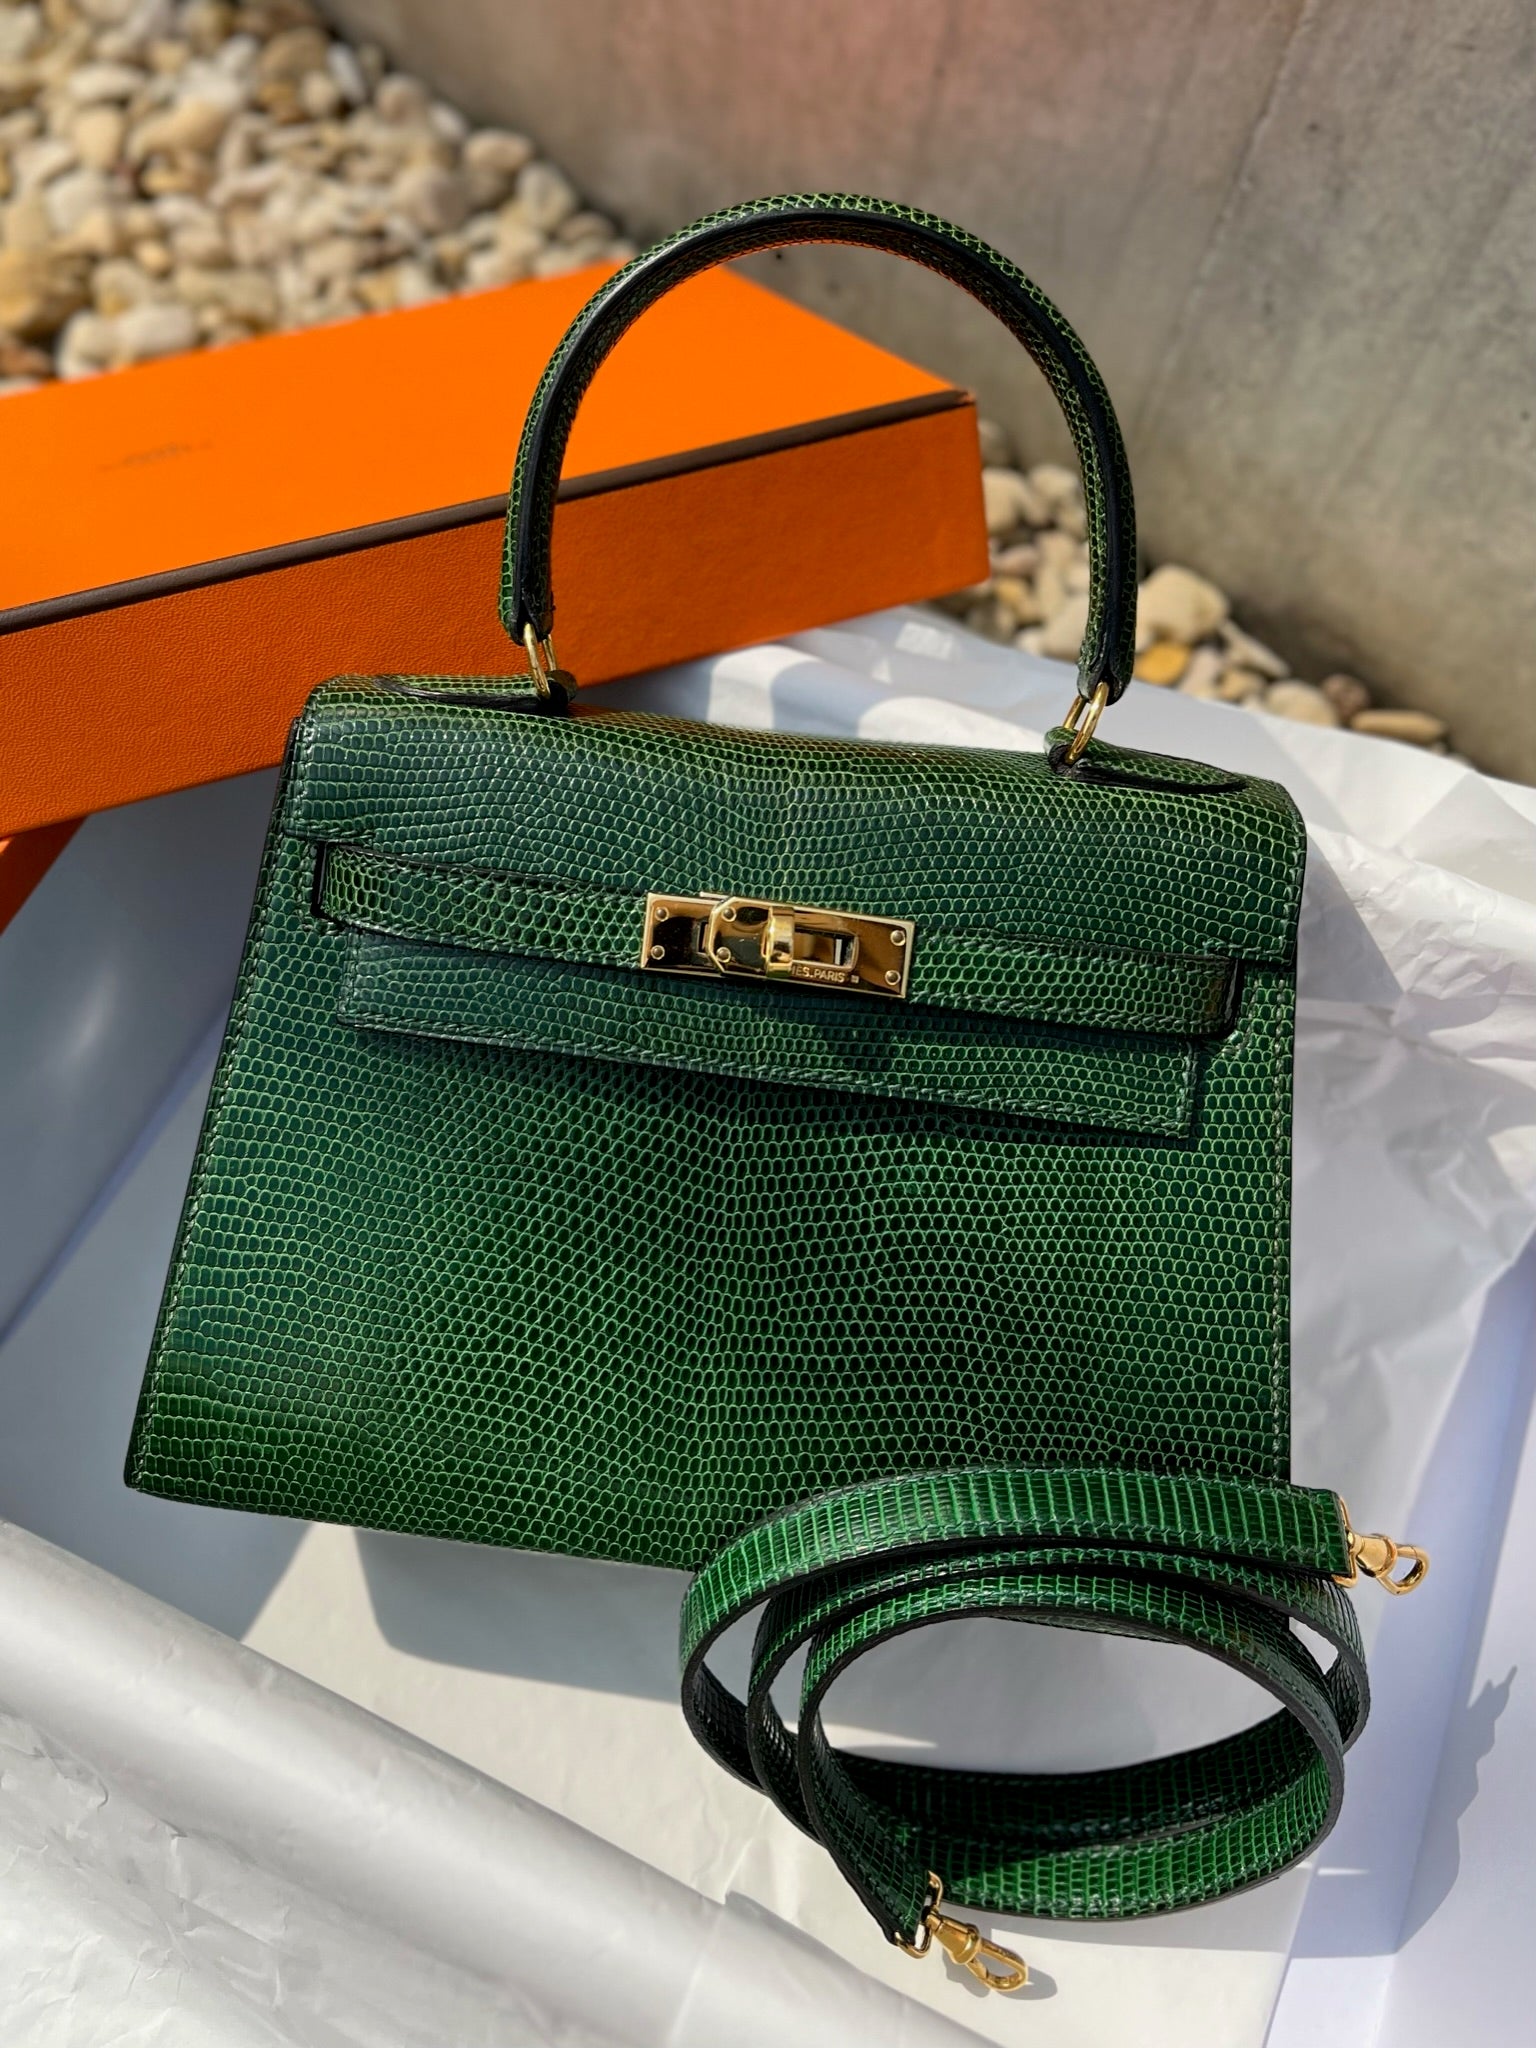 This lizard 🦎 touch mini kelly ii has become my everyday bag now